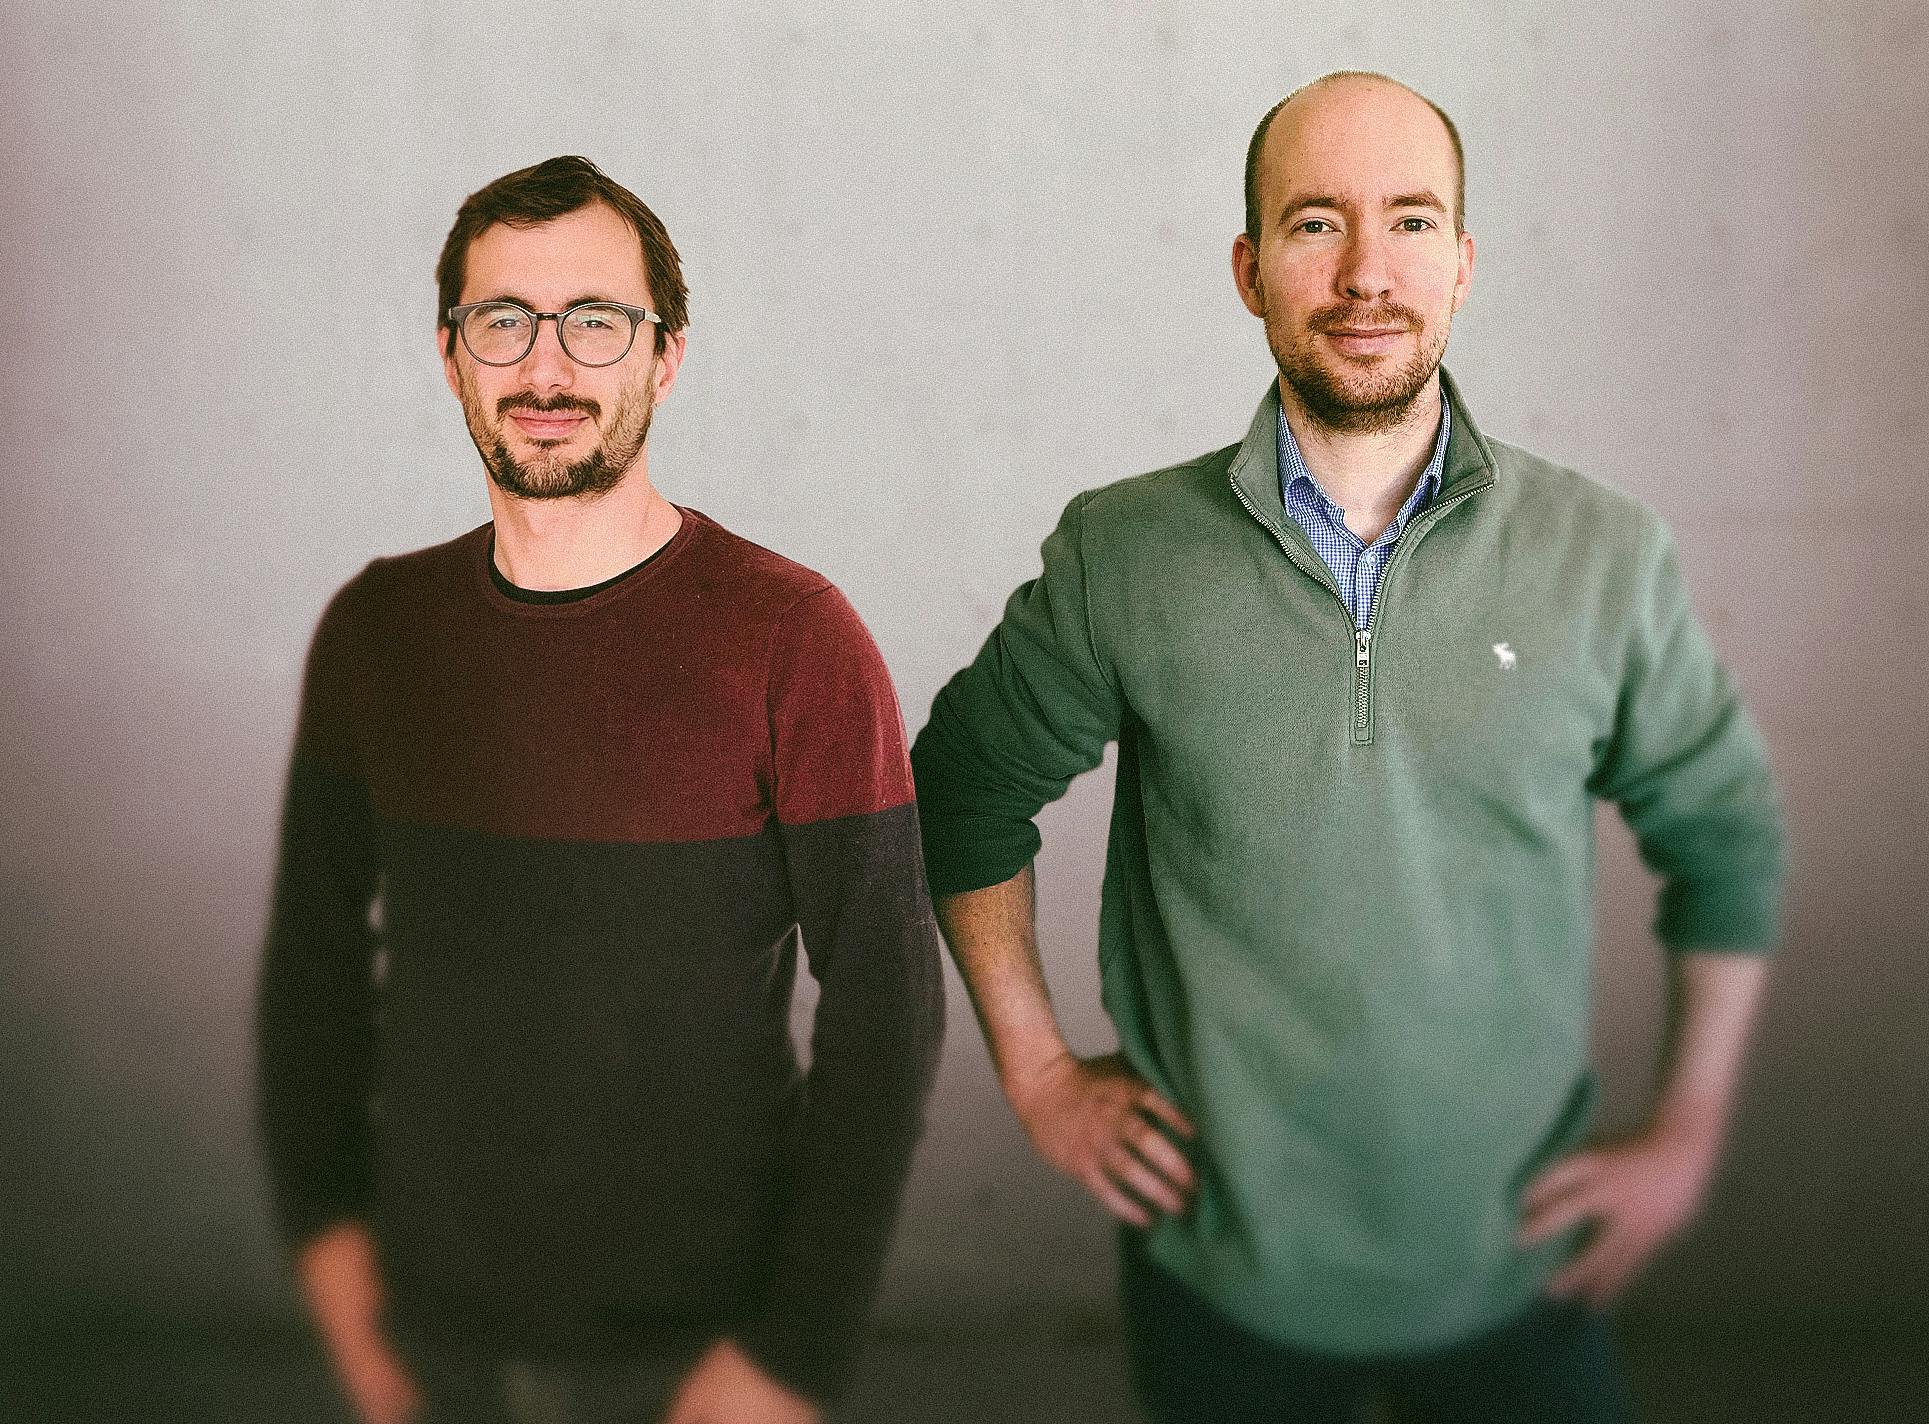 Thierry and Tommaso Stream Co-Founders